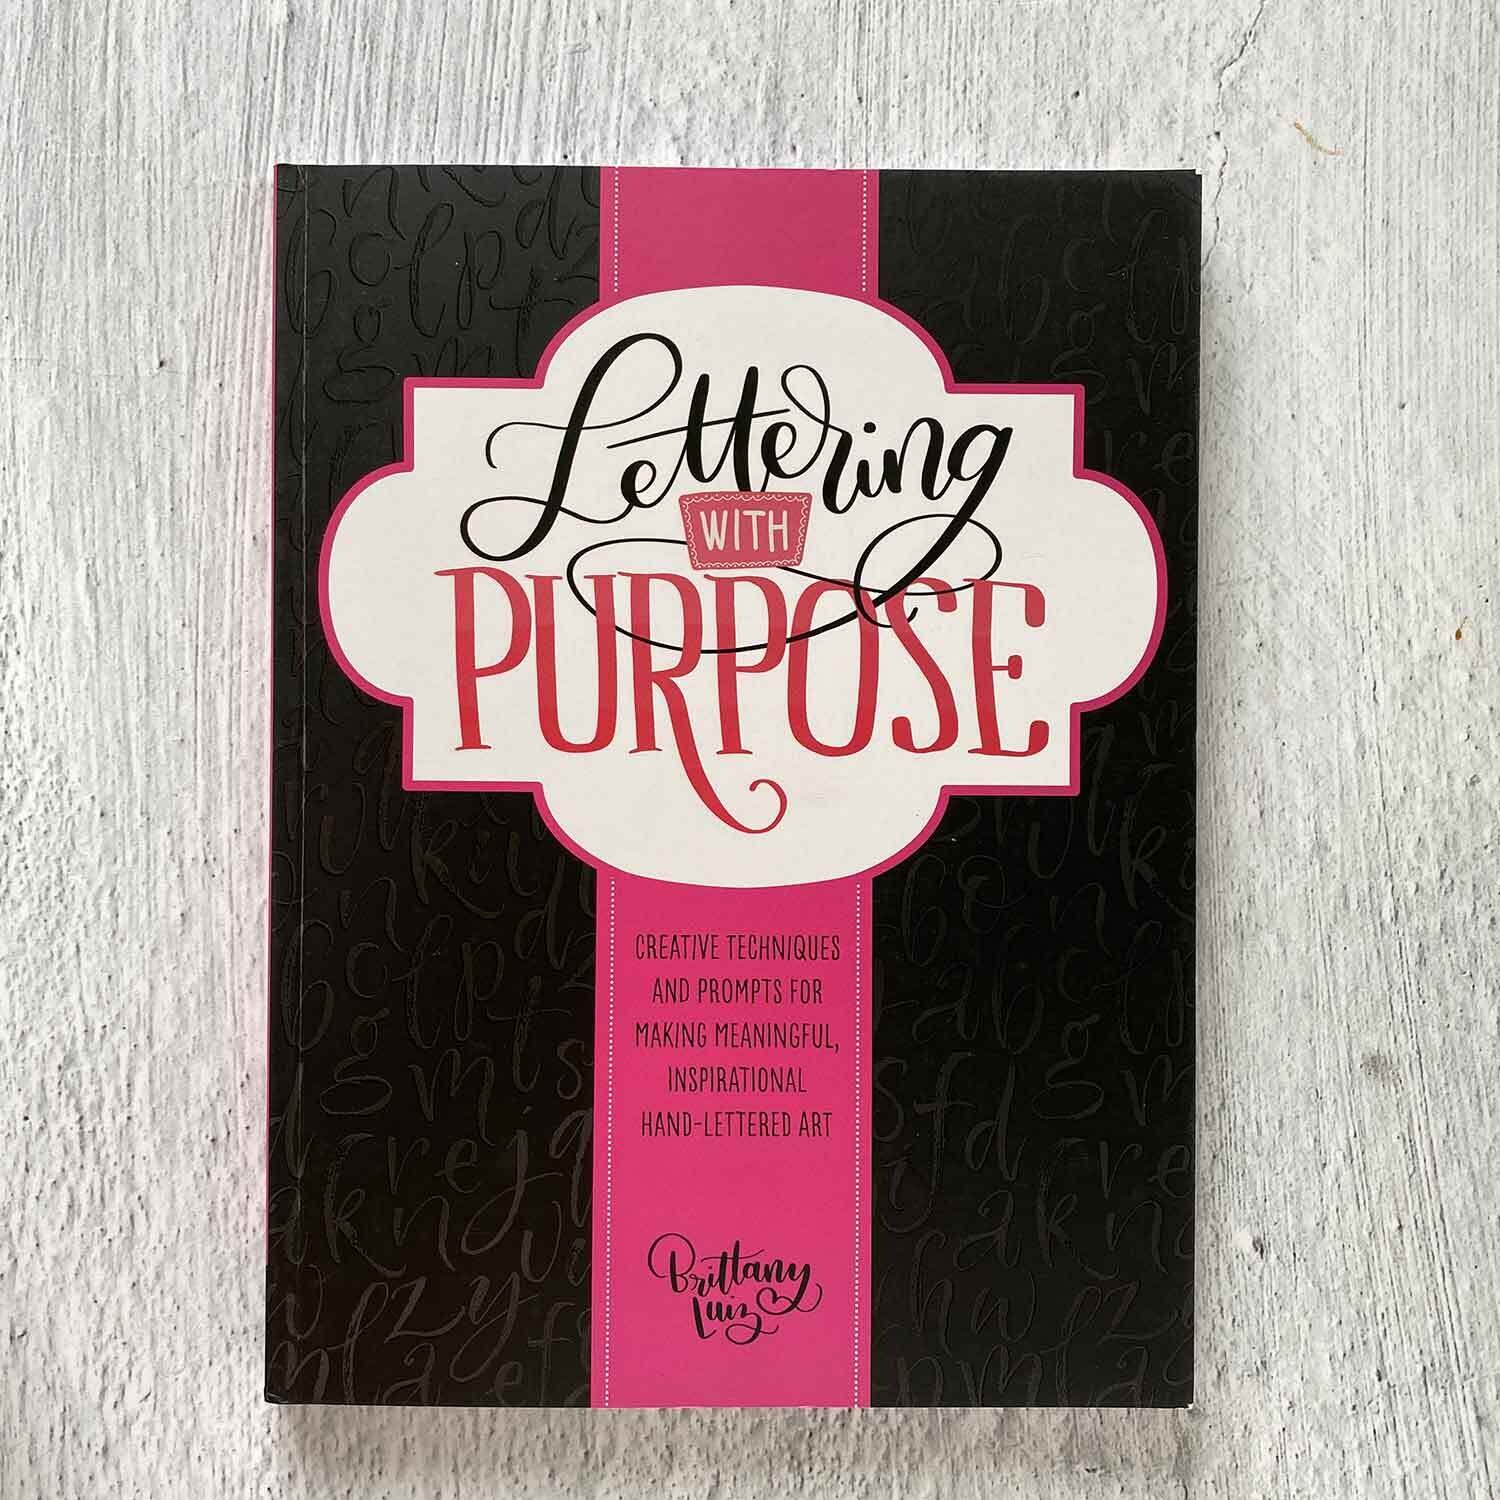 Lettering with Purpose: Creative Techniques and Prompts for Making Meaningful, Inspirational Hand-Lettered Art